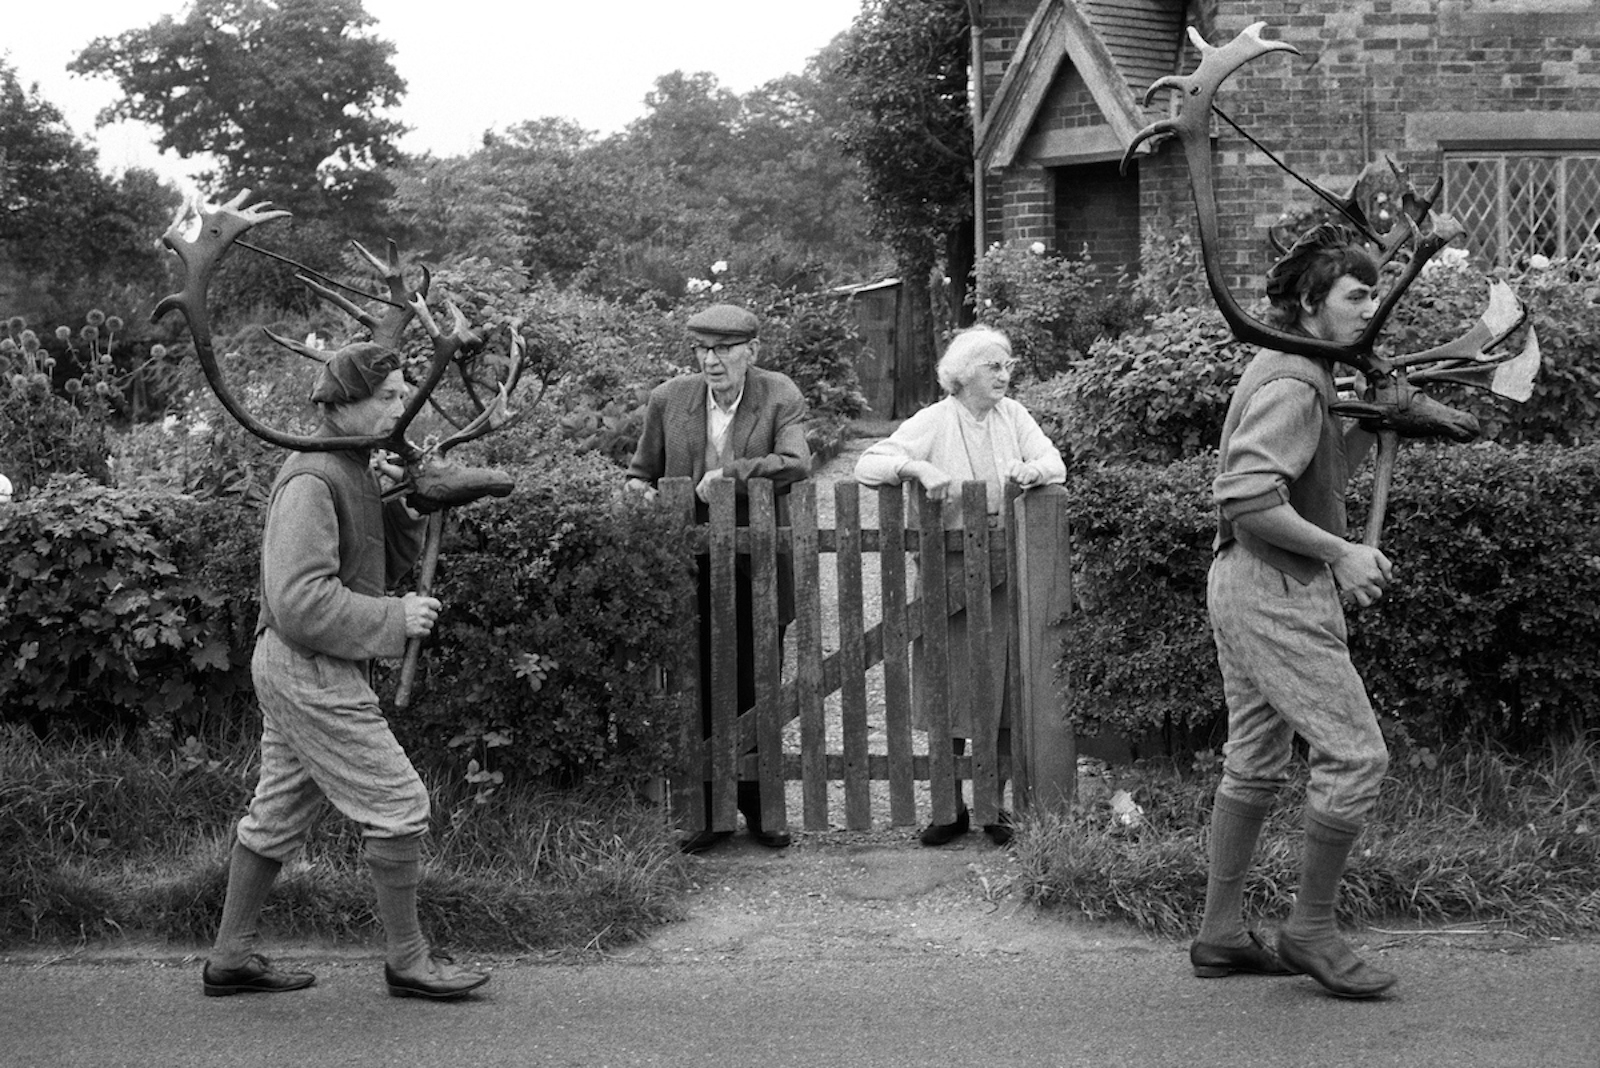 Abbots Bromley Horn Dance, Staffordshire, 1973